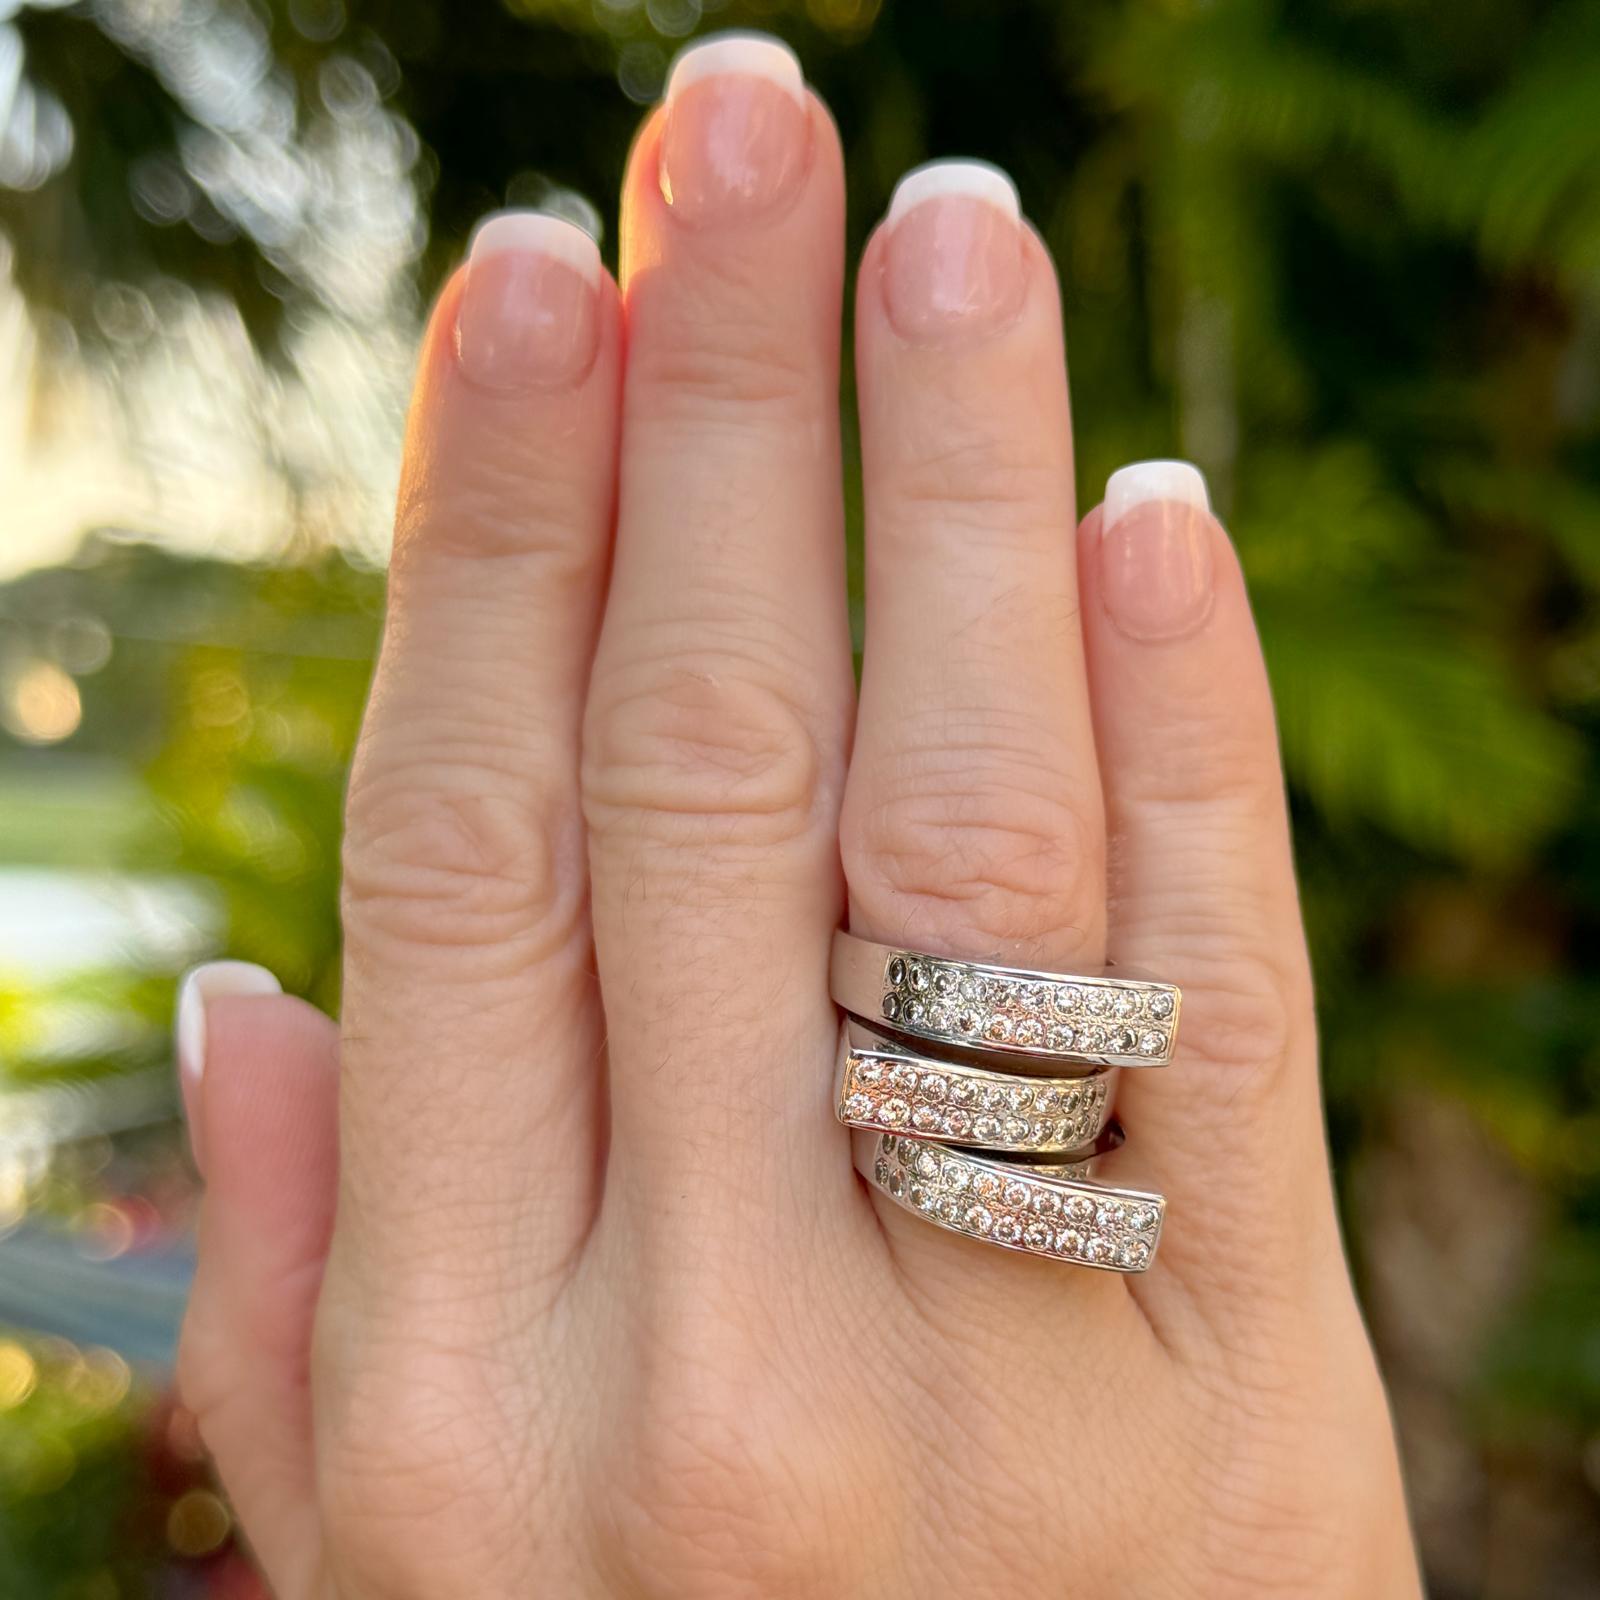 Set of three asymmetrical diamond stacking band crafted in 14 karat white gold. The ring feature 60 round brilliant cut diamonds weighing approximately 1.20 carat total weight. The diamonds are graded H-I color and SI clarity. Each ring measures